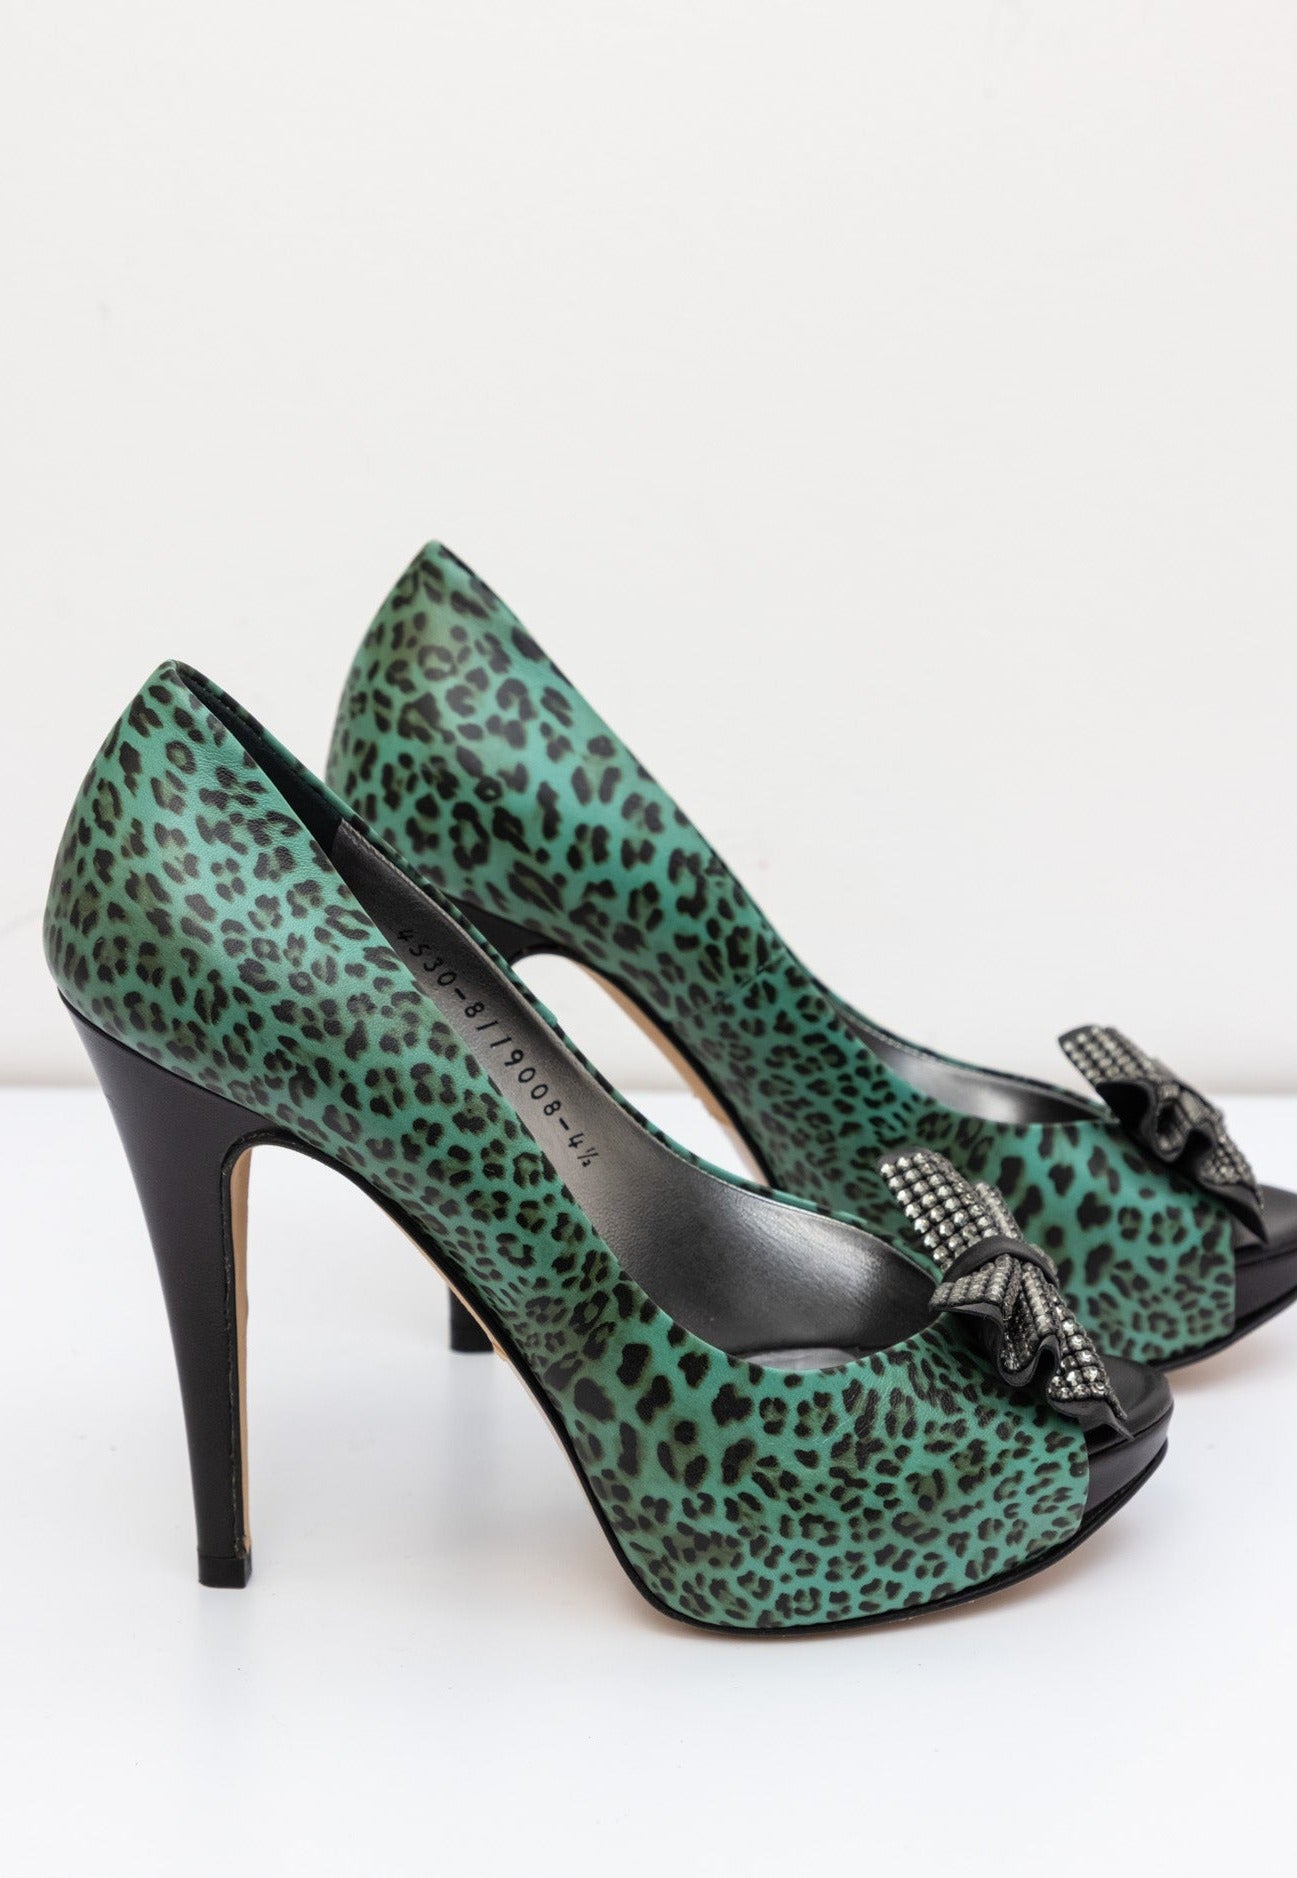 GINA Leather Green Heels Shoes with Leopard Print | Size UK 4.5 | Made in England